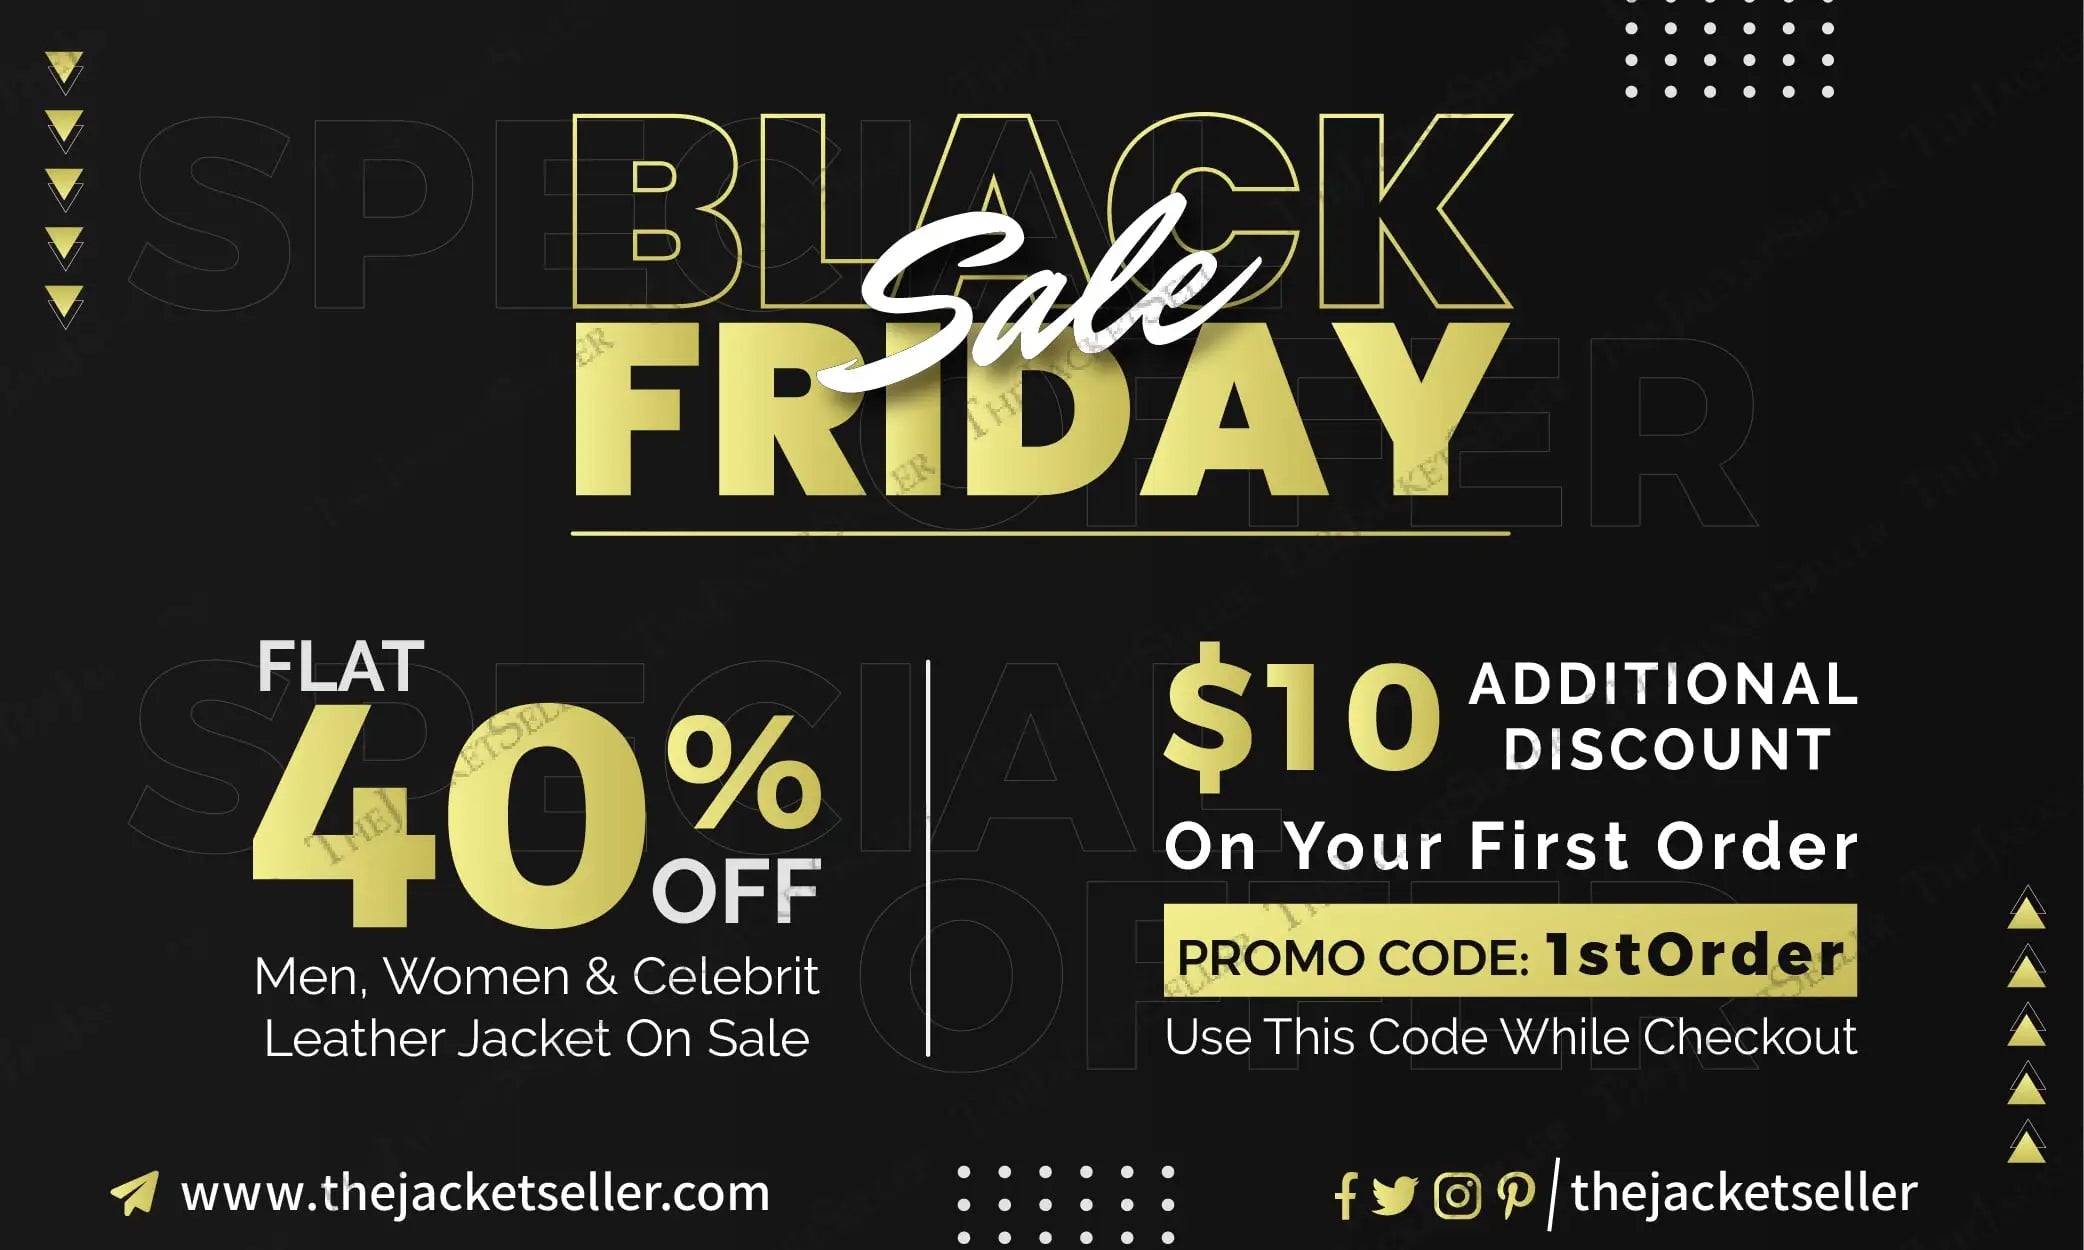 Men's and Women Leather Jackets on Black Friday Sale